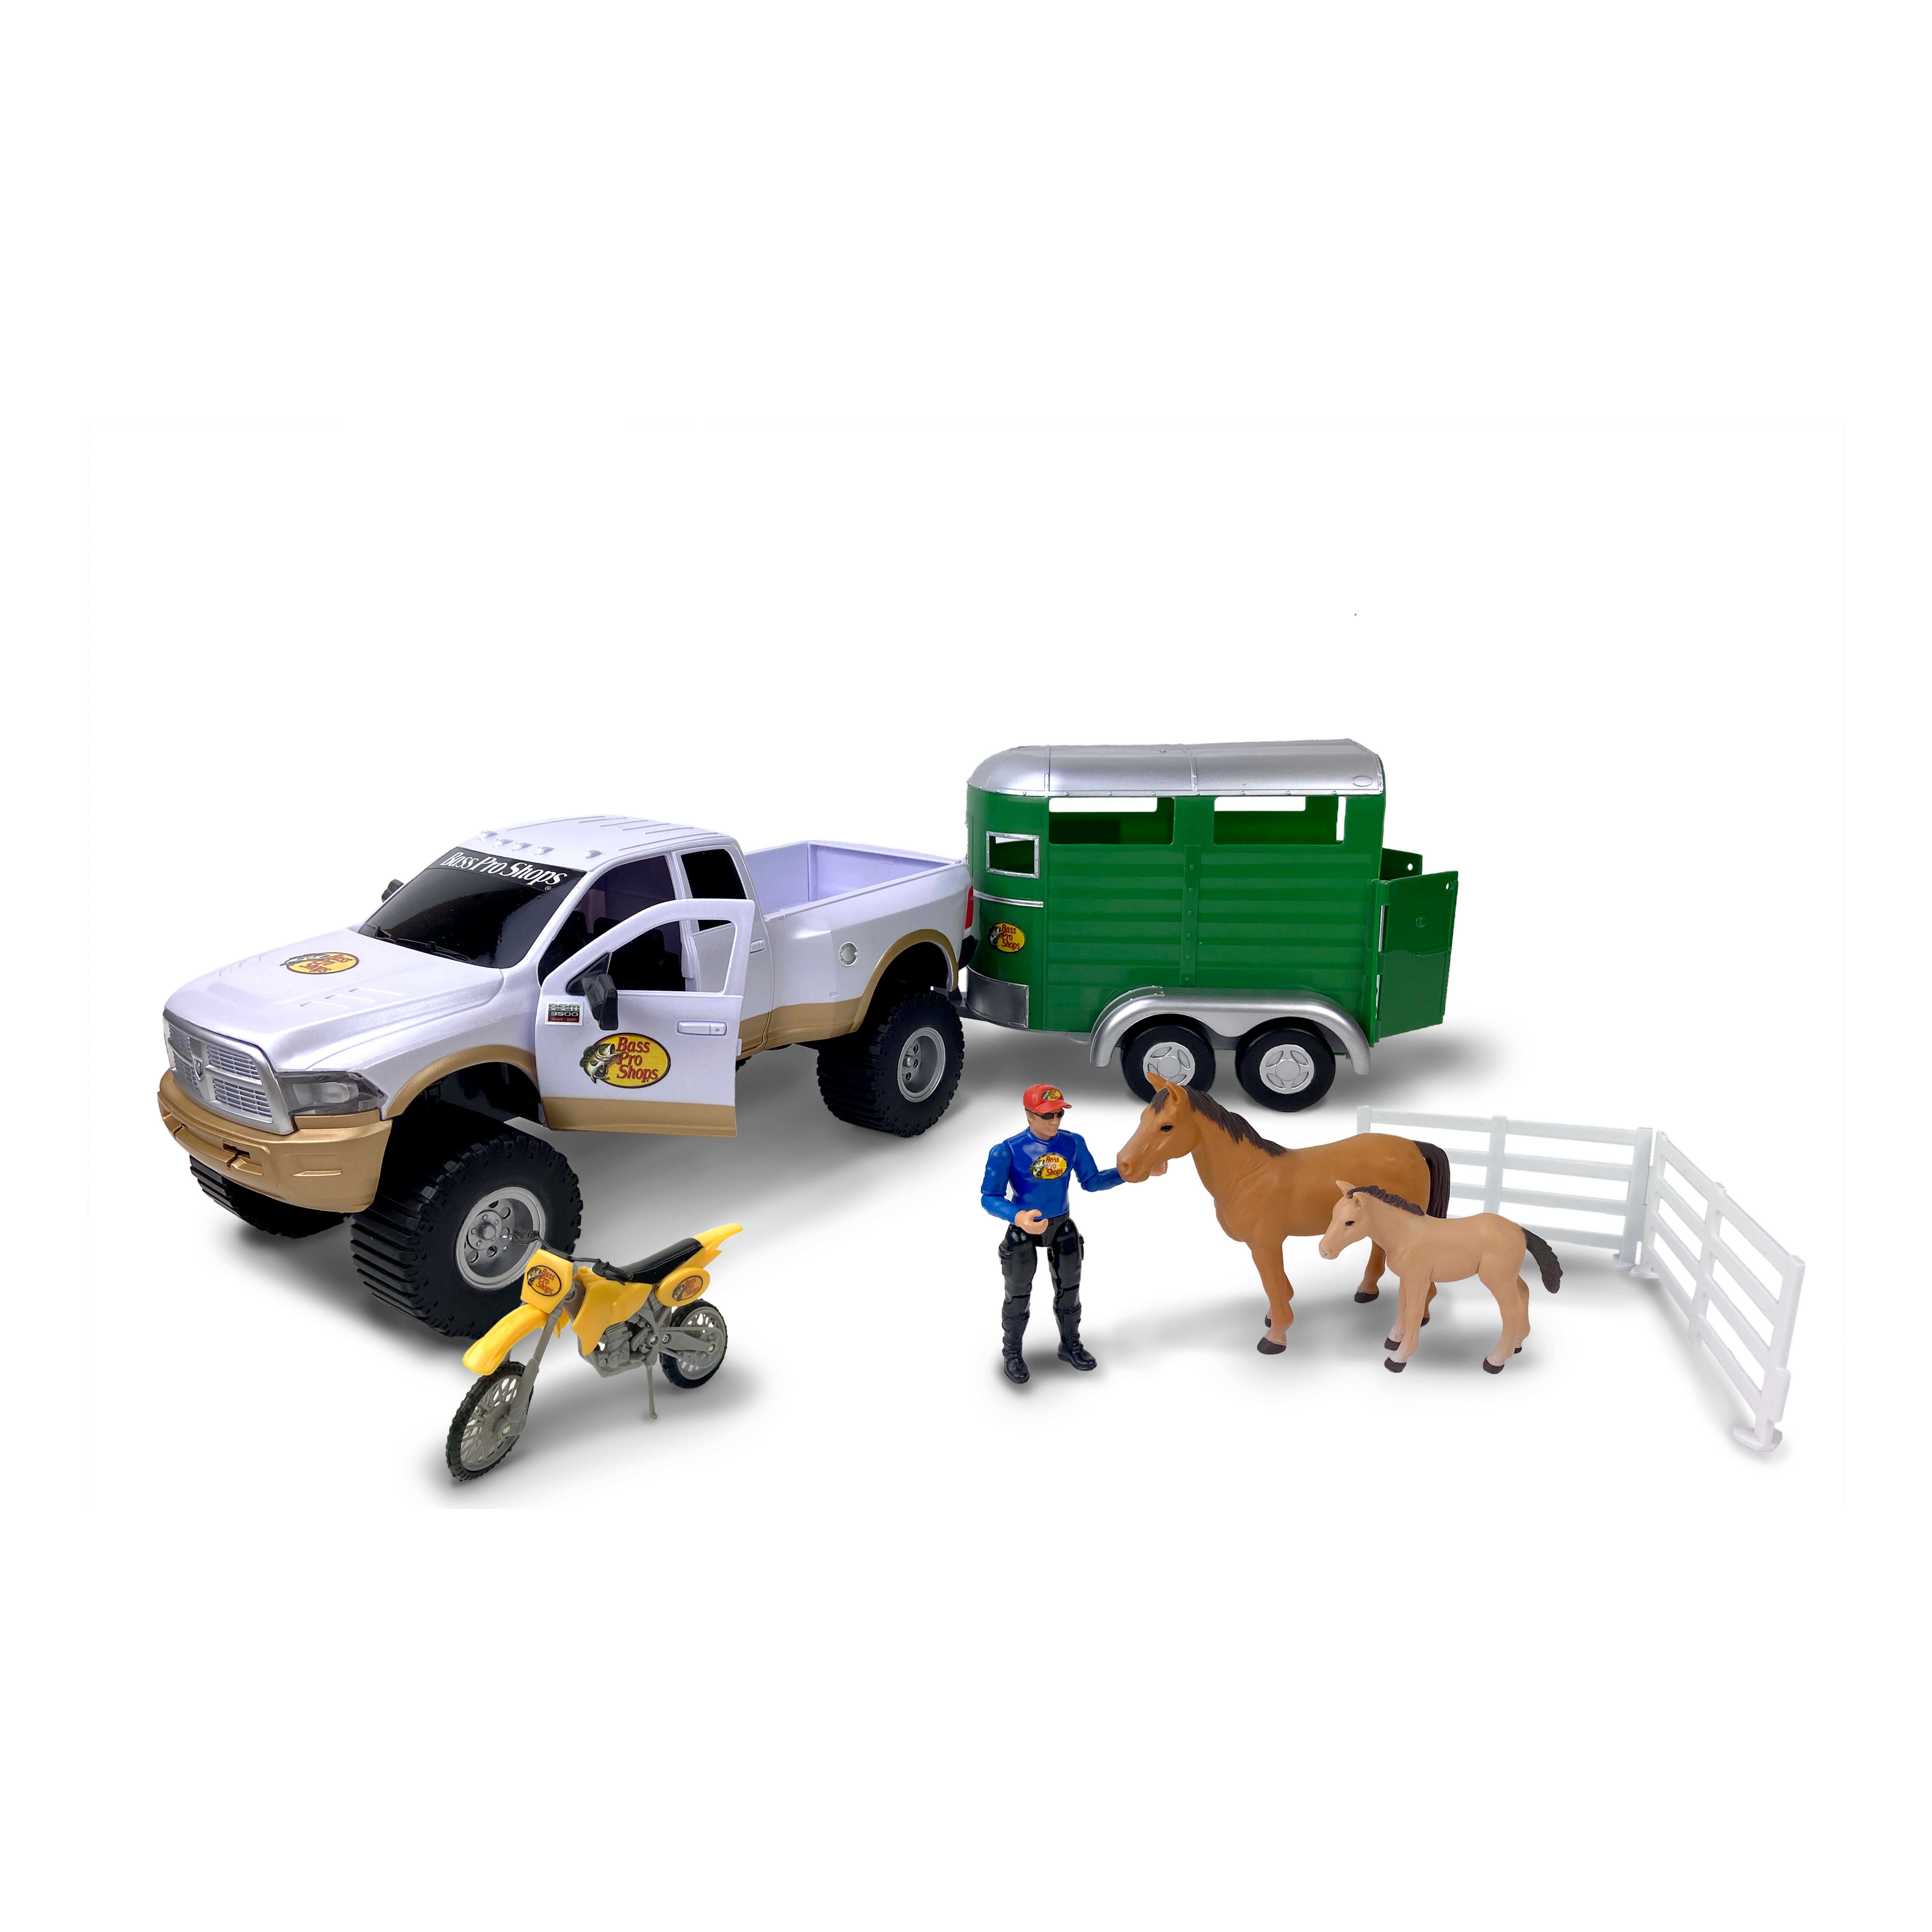 Bass Pro Shops® Licensed Deluxe Dodge® Ram and Horse Trailer Adventure Truck Playset